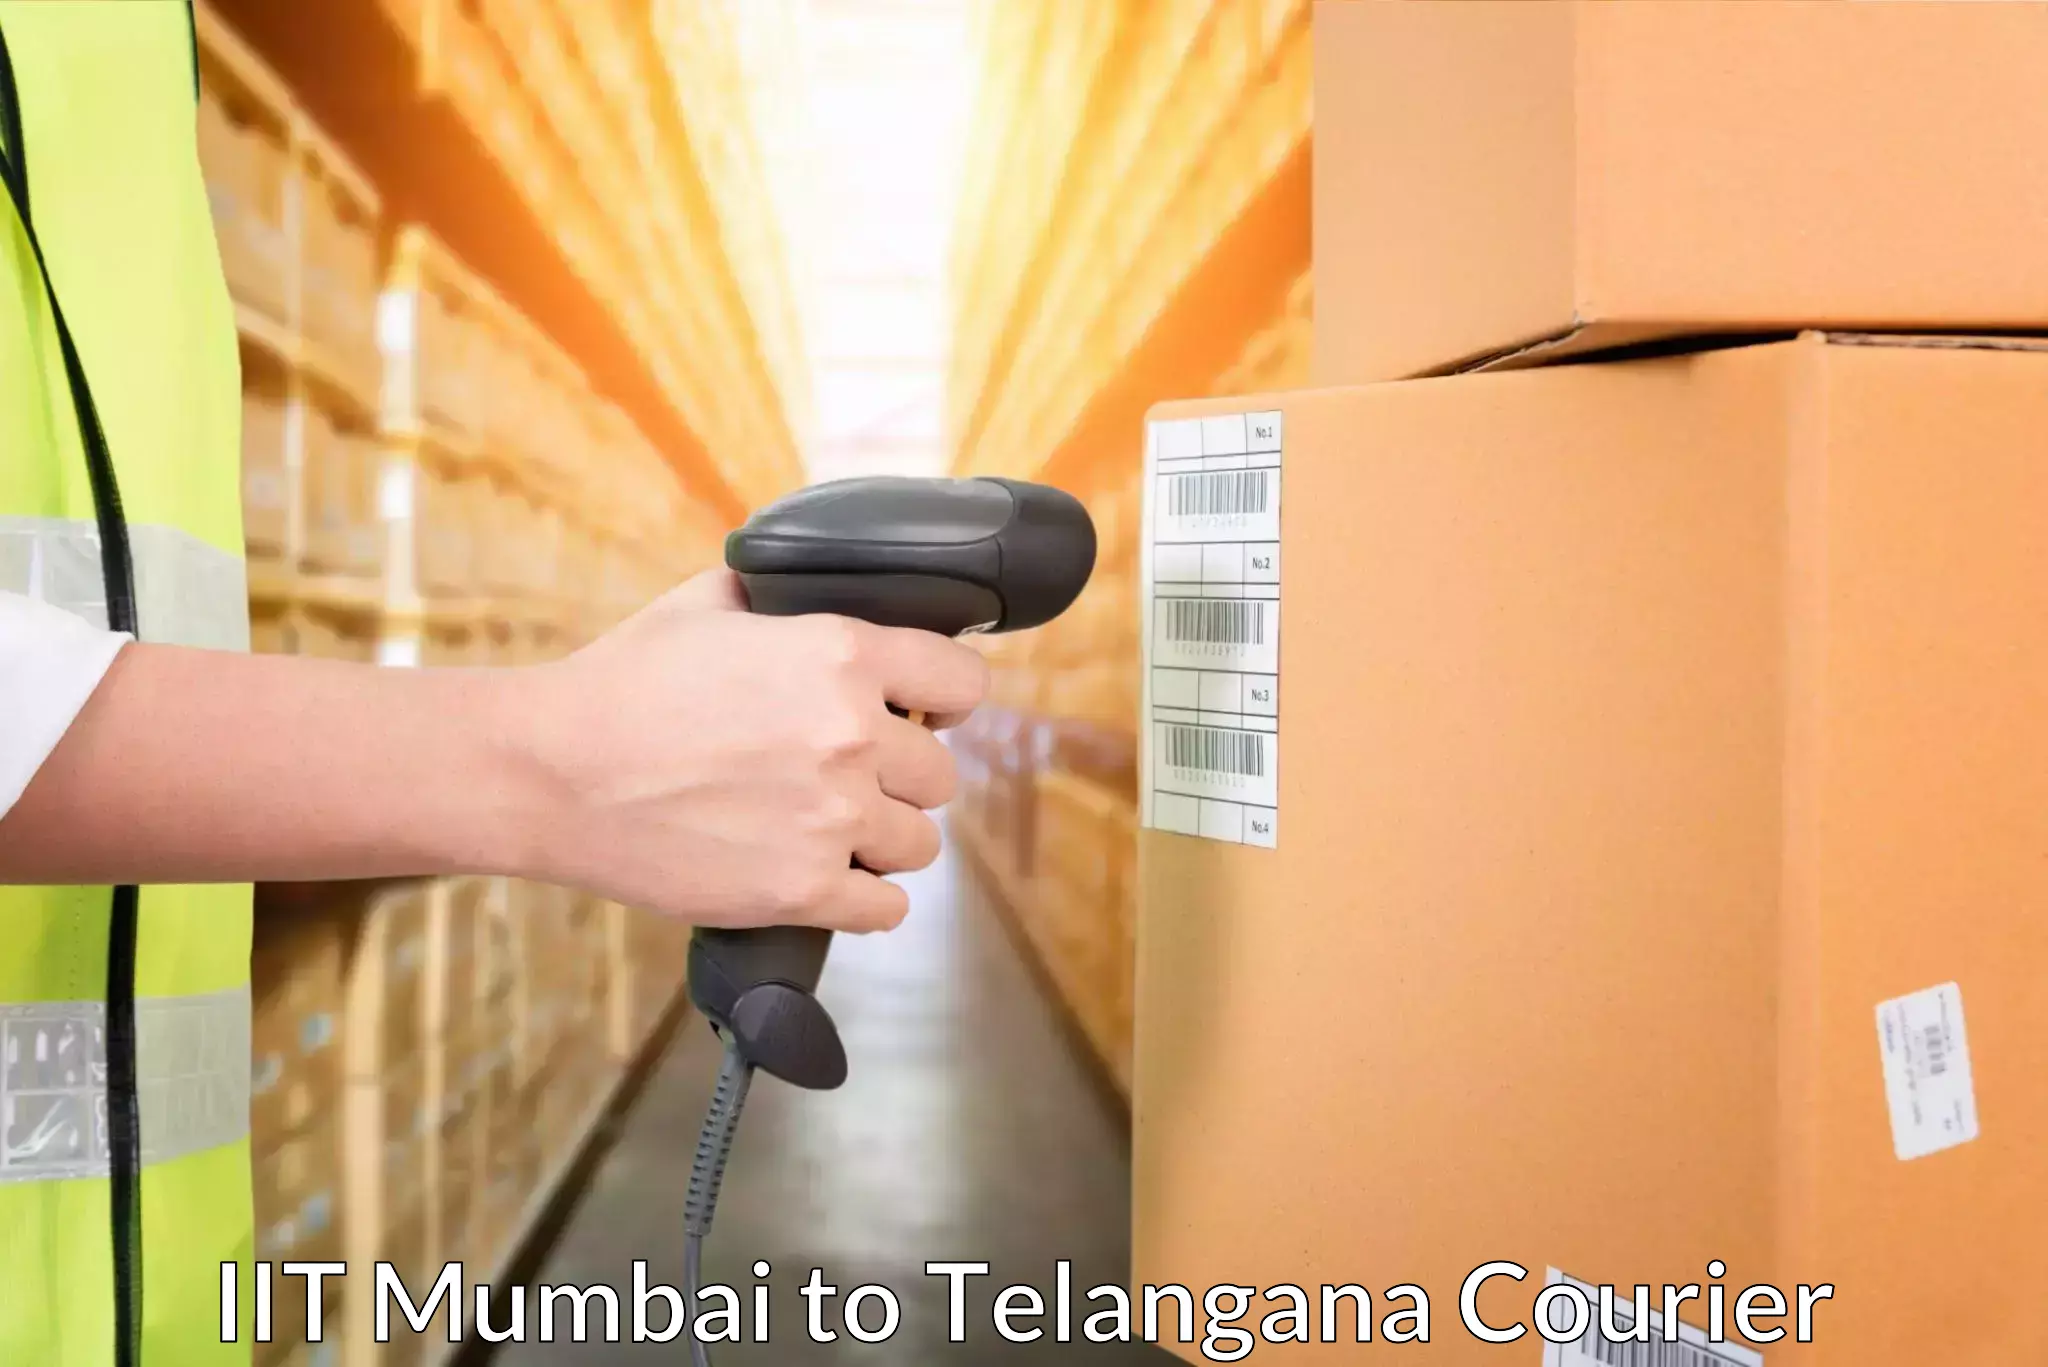 Personalized courier experiences IIT Mumbai to Secunderabad